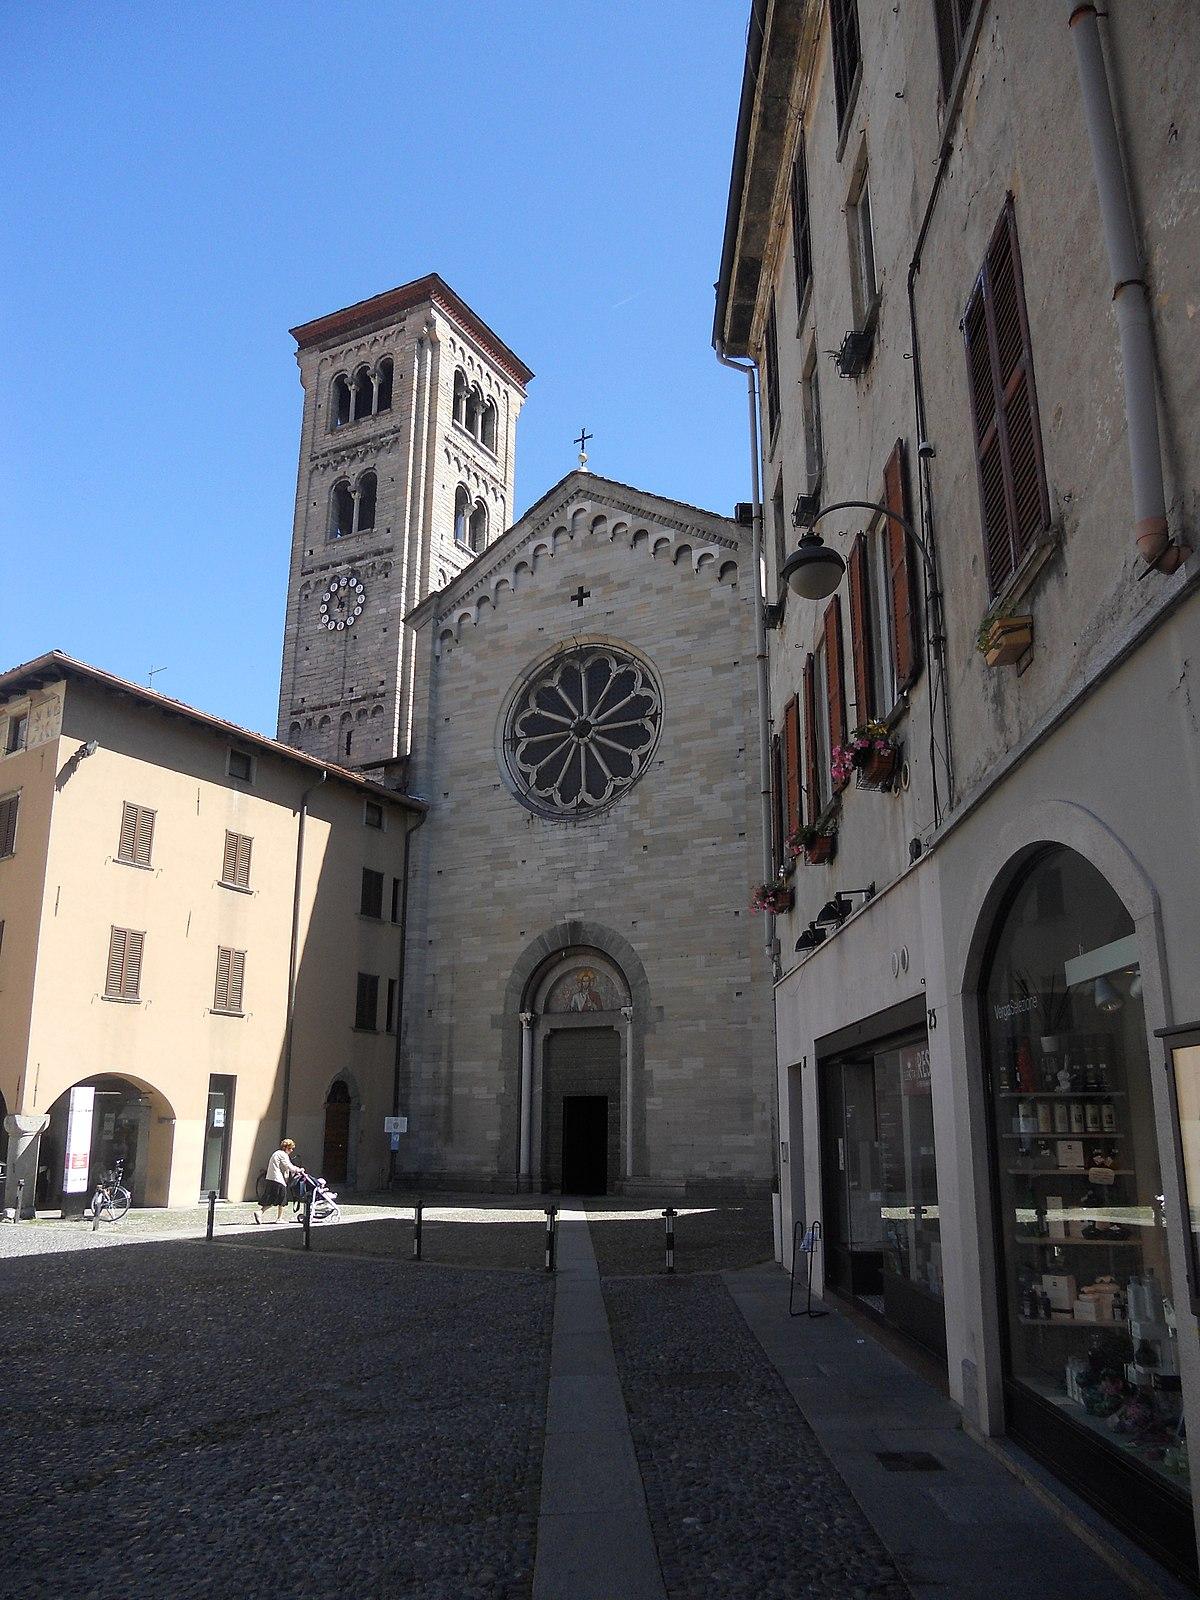 Cover image of this place Basilica di San Fedele